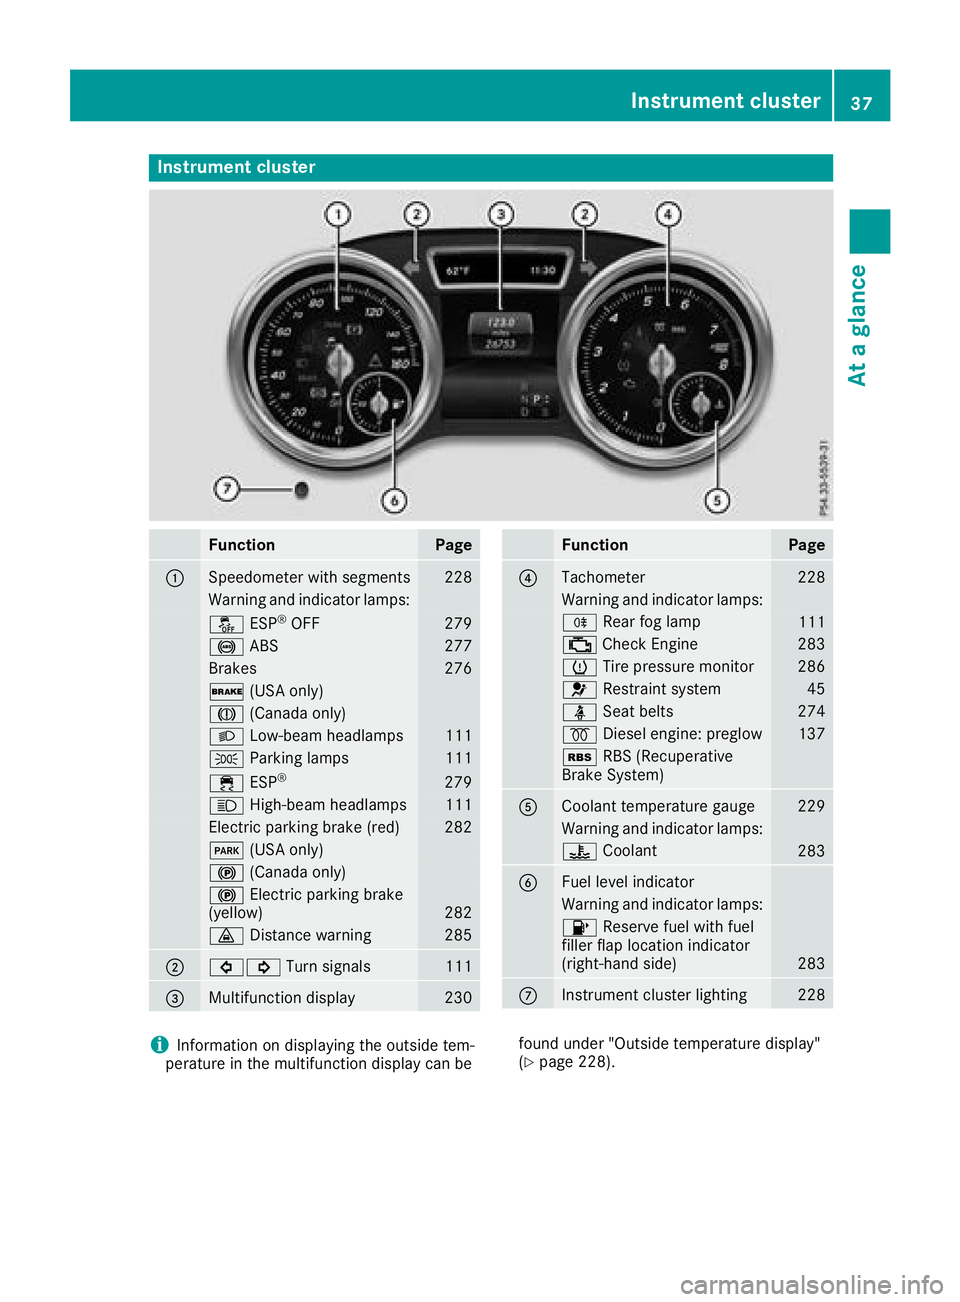 MERCEDES-BENZ GLE COUPE 2018 Owners Guide Instrument cluster
FunctionPage
:Speedometer wit hsegments22 8
Warning and indicator lamps:
å ESP®OF F279
! ABS277
Brake s276
$ (USAonly)
J (Canada only)
LLow-beam headlamps111
T Parking lamp s111
�